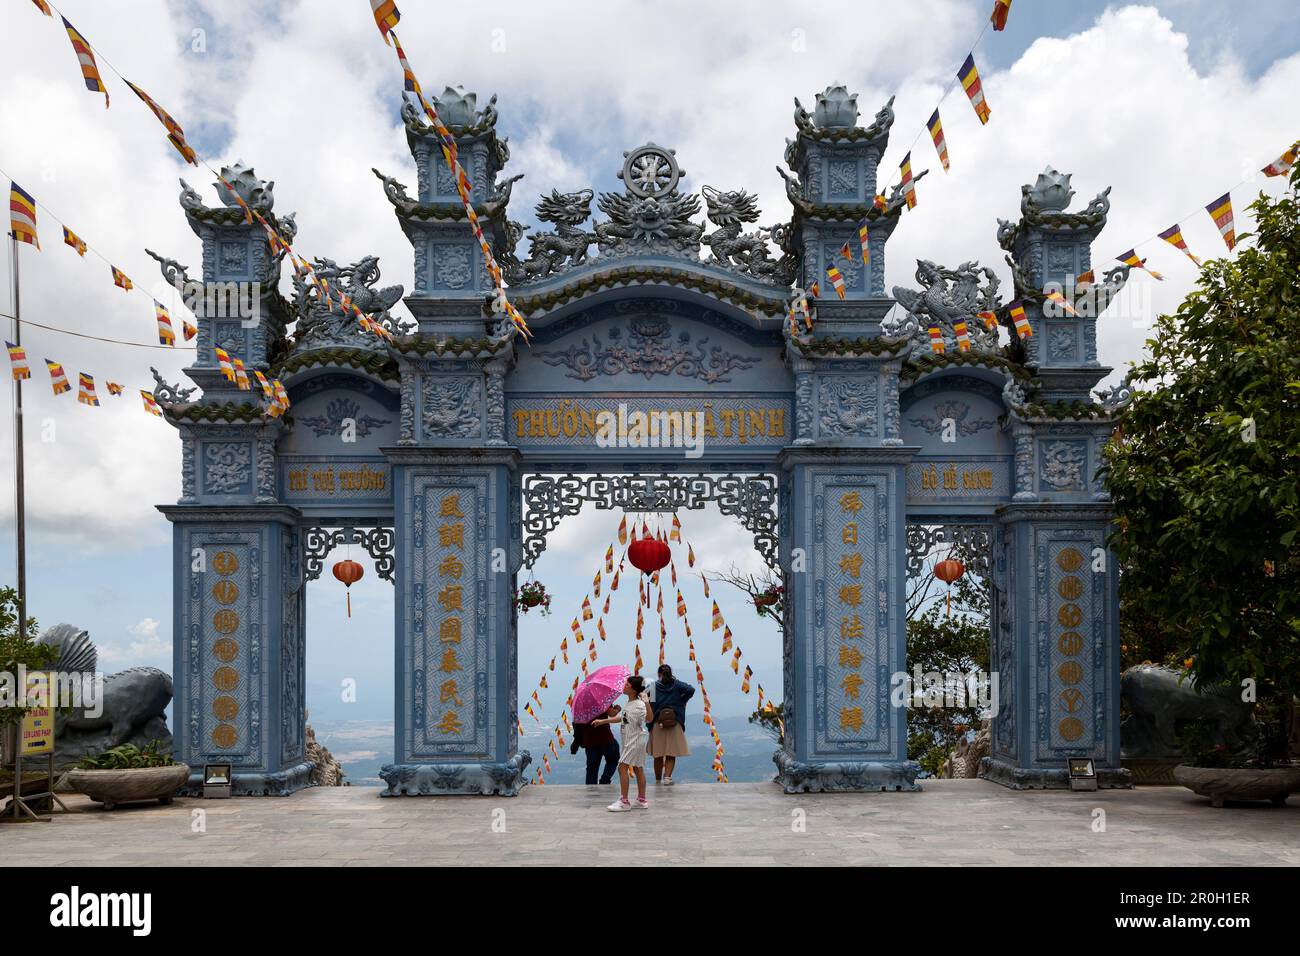 Bà Nà Hills, Vietnam - August 22 2018: The Linh Ung Pagoda in the Bà Nà Hills, near Da Nang, Vietnam. Bà Nà Hills are located in the Truong Son Mounta Stock Photo